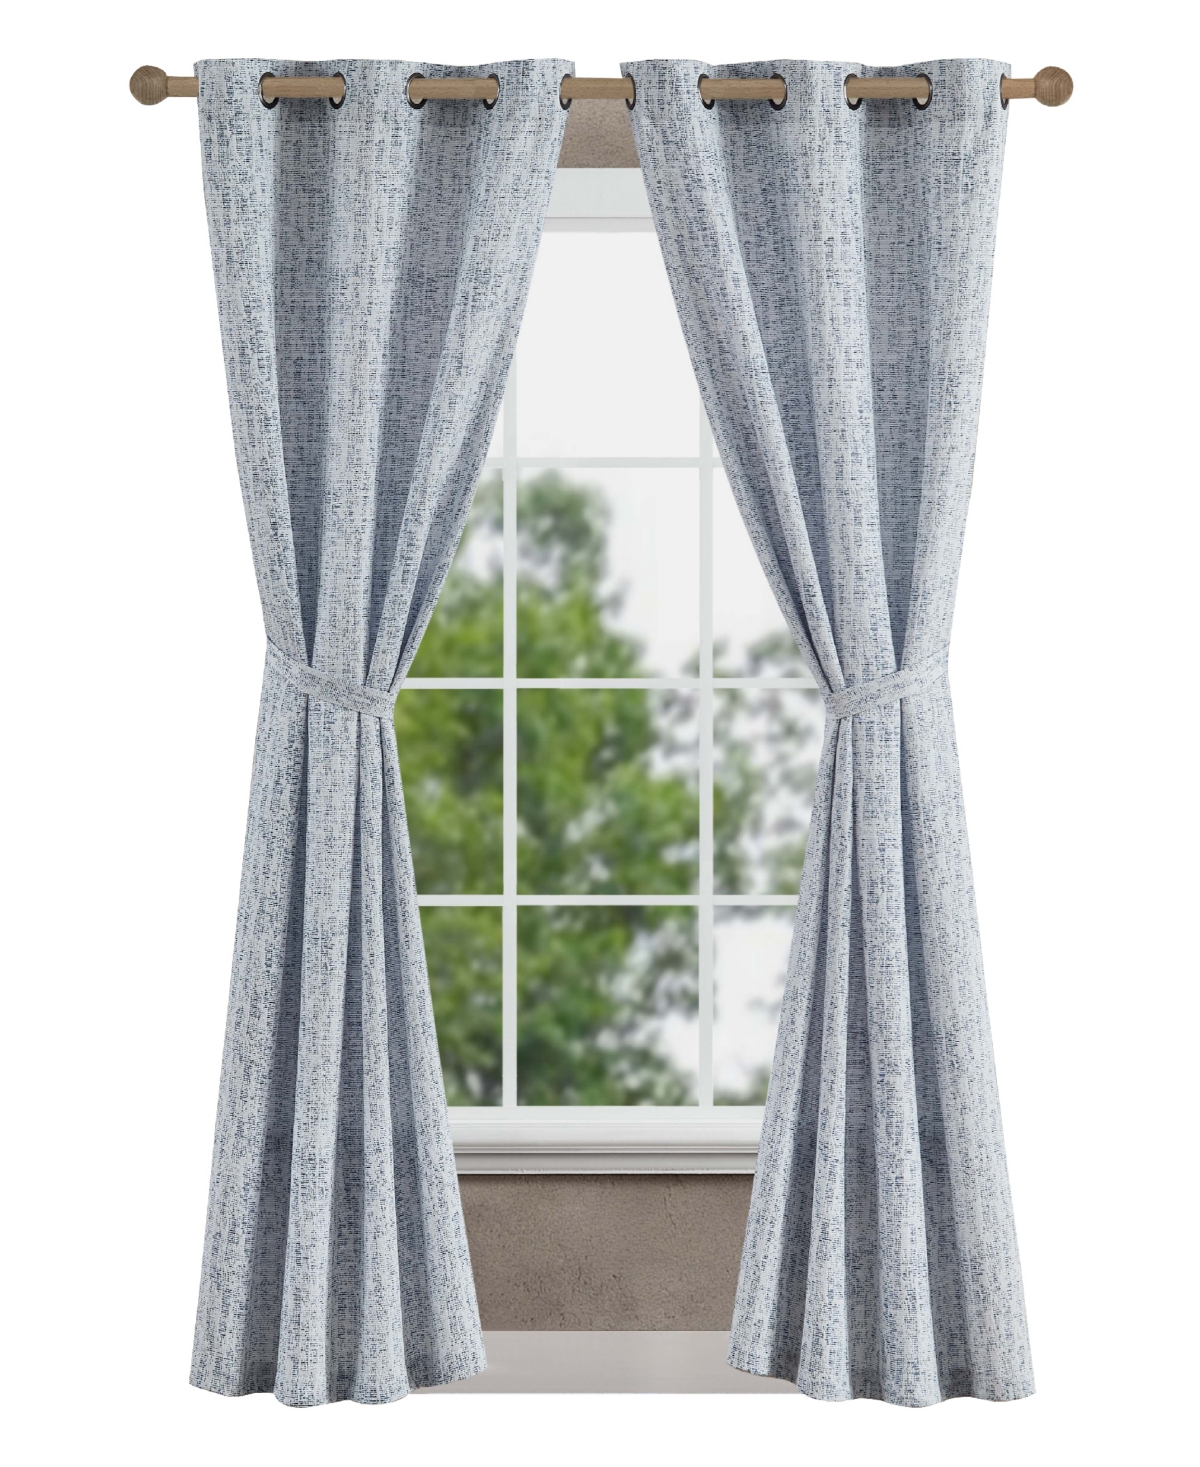 Jessica Simpson Tallulah Textured Blackout Grommet Window Curtain Panel Pair With Tiebacks Collection In Blue